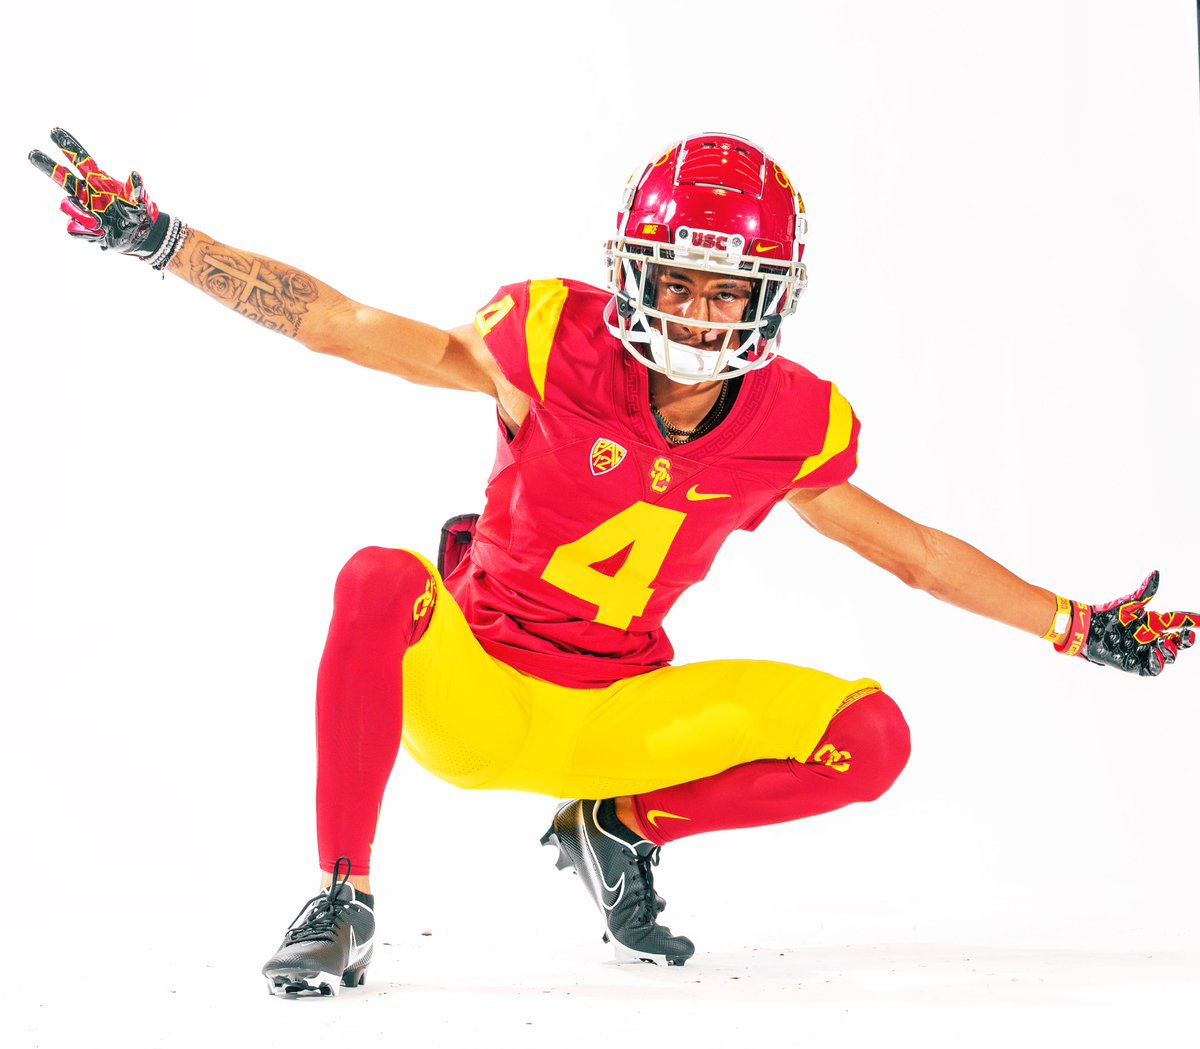 ✌🏾Move in silence!! can’t get caught up in the hype #FightOn